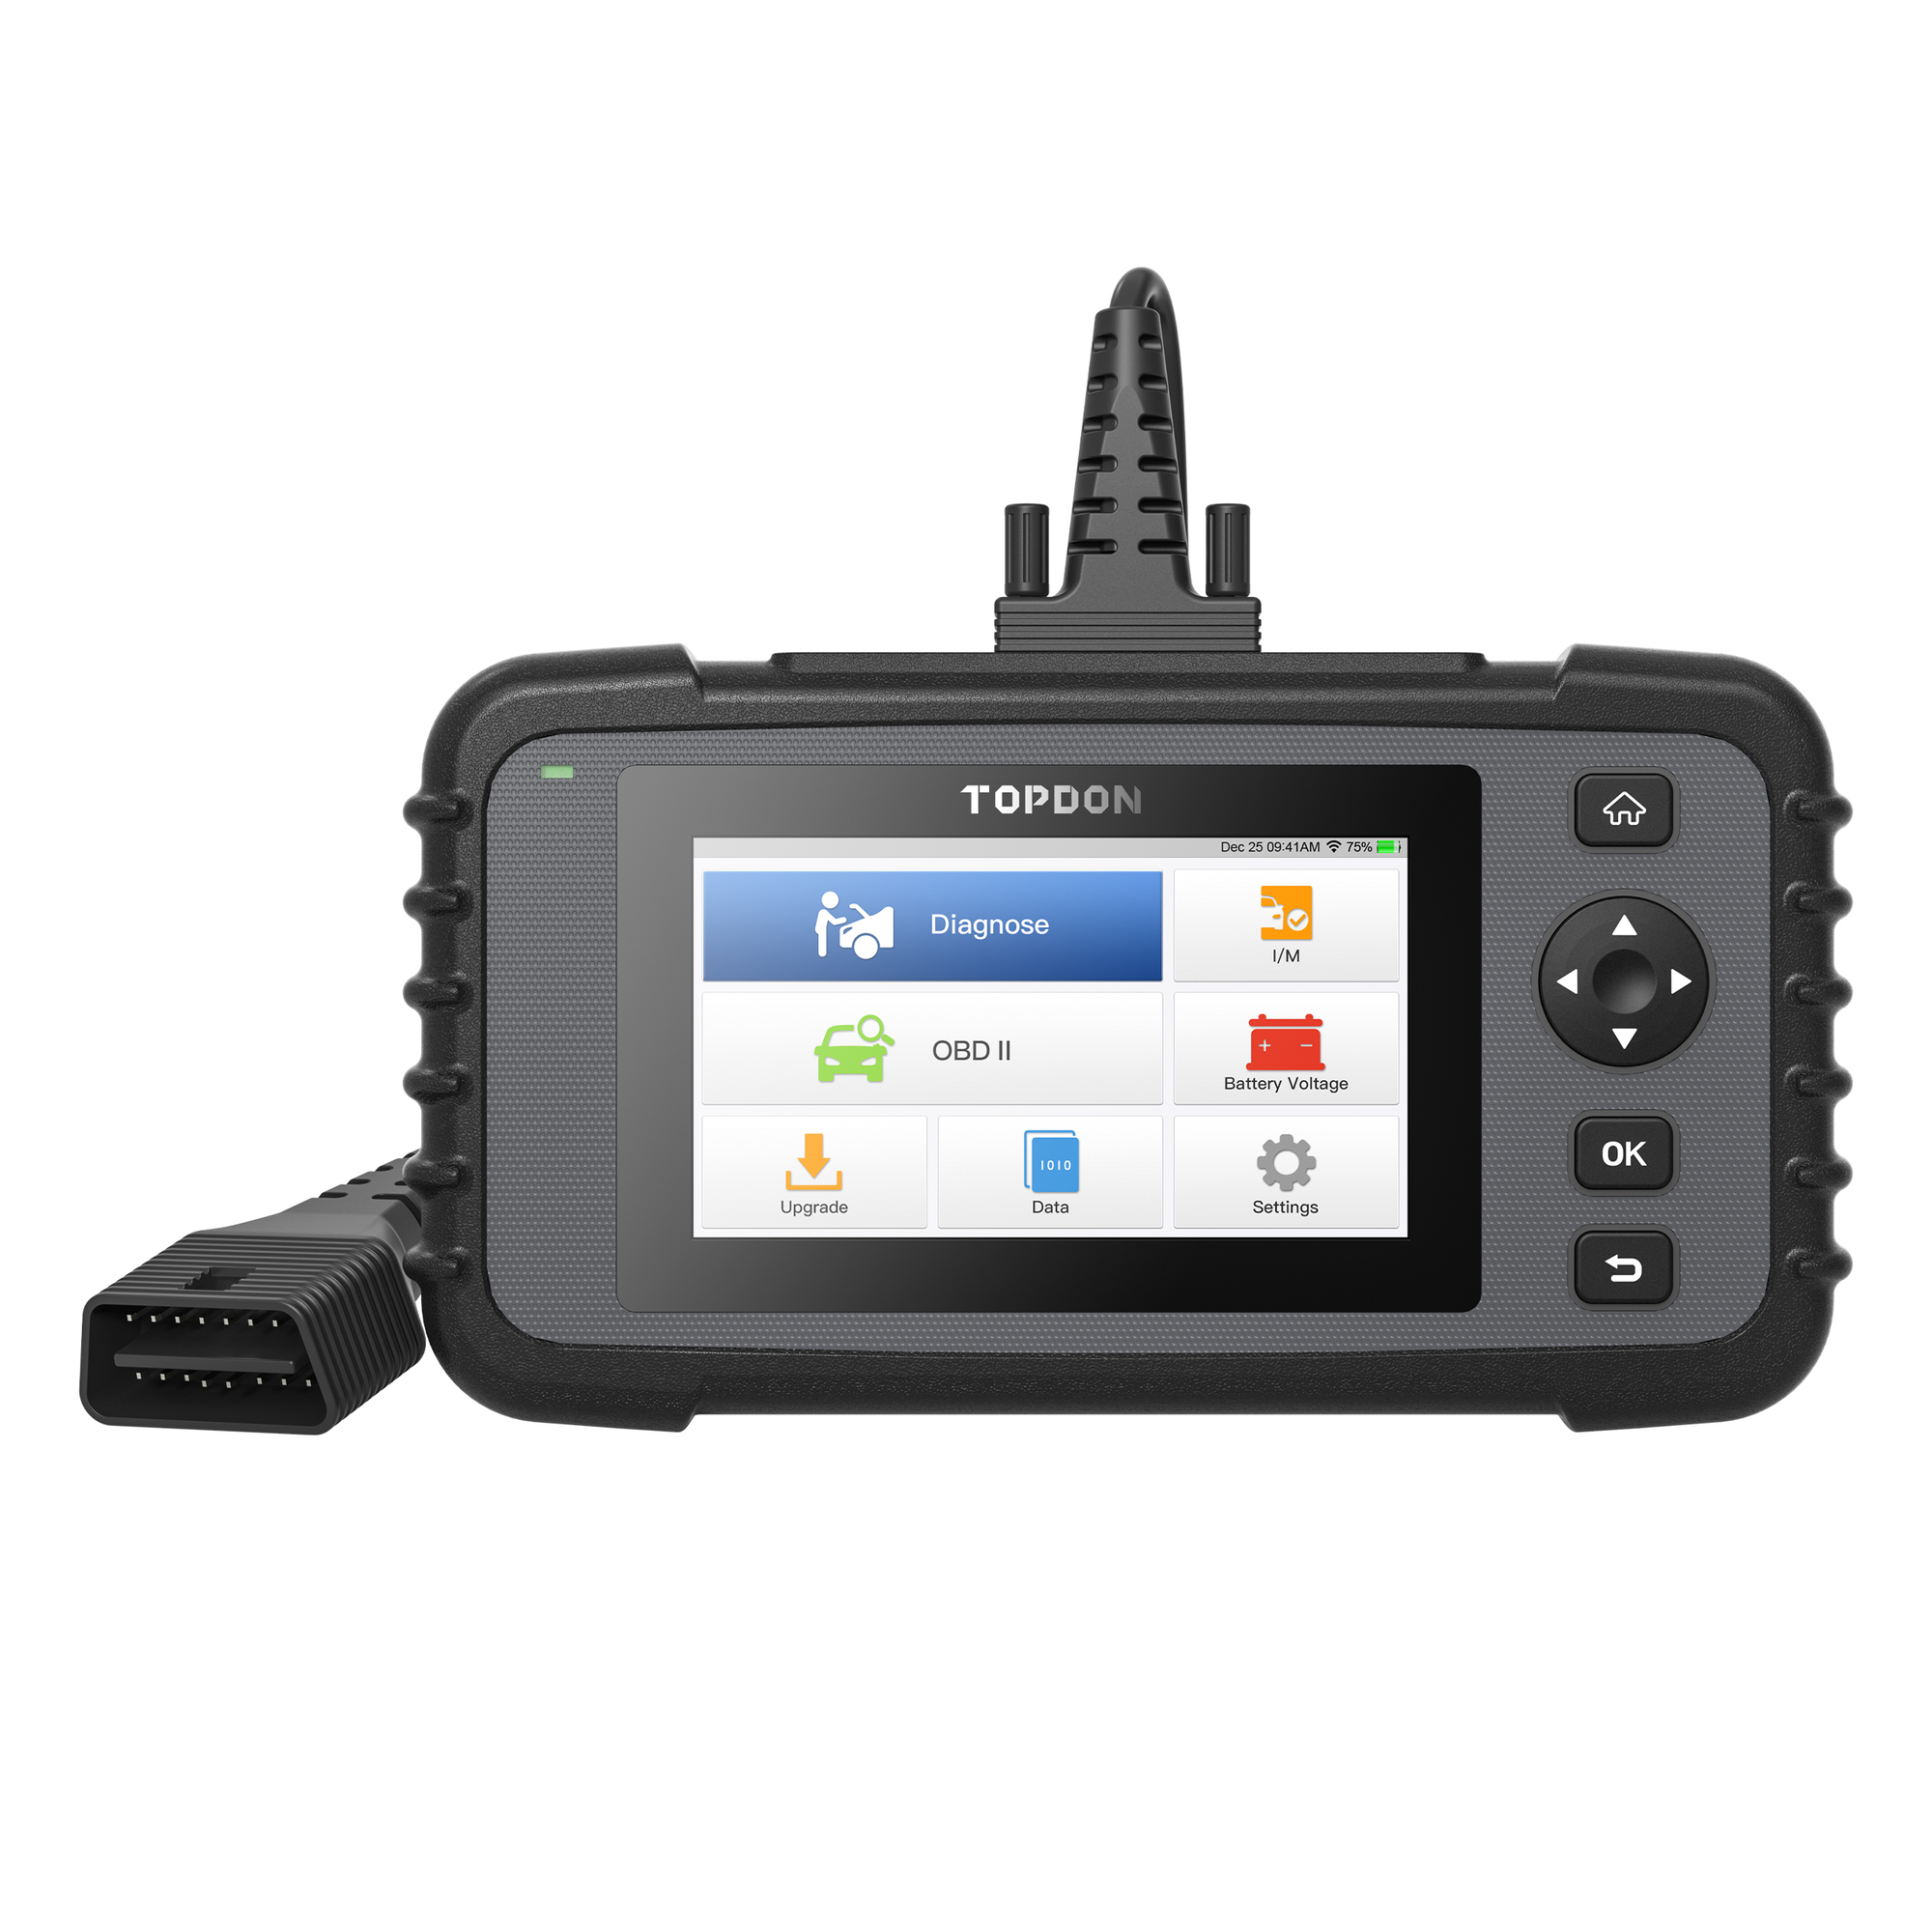 TOPDON, Android based OBD II Diagnostic Scan Tool, Model AD500